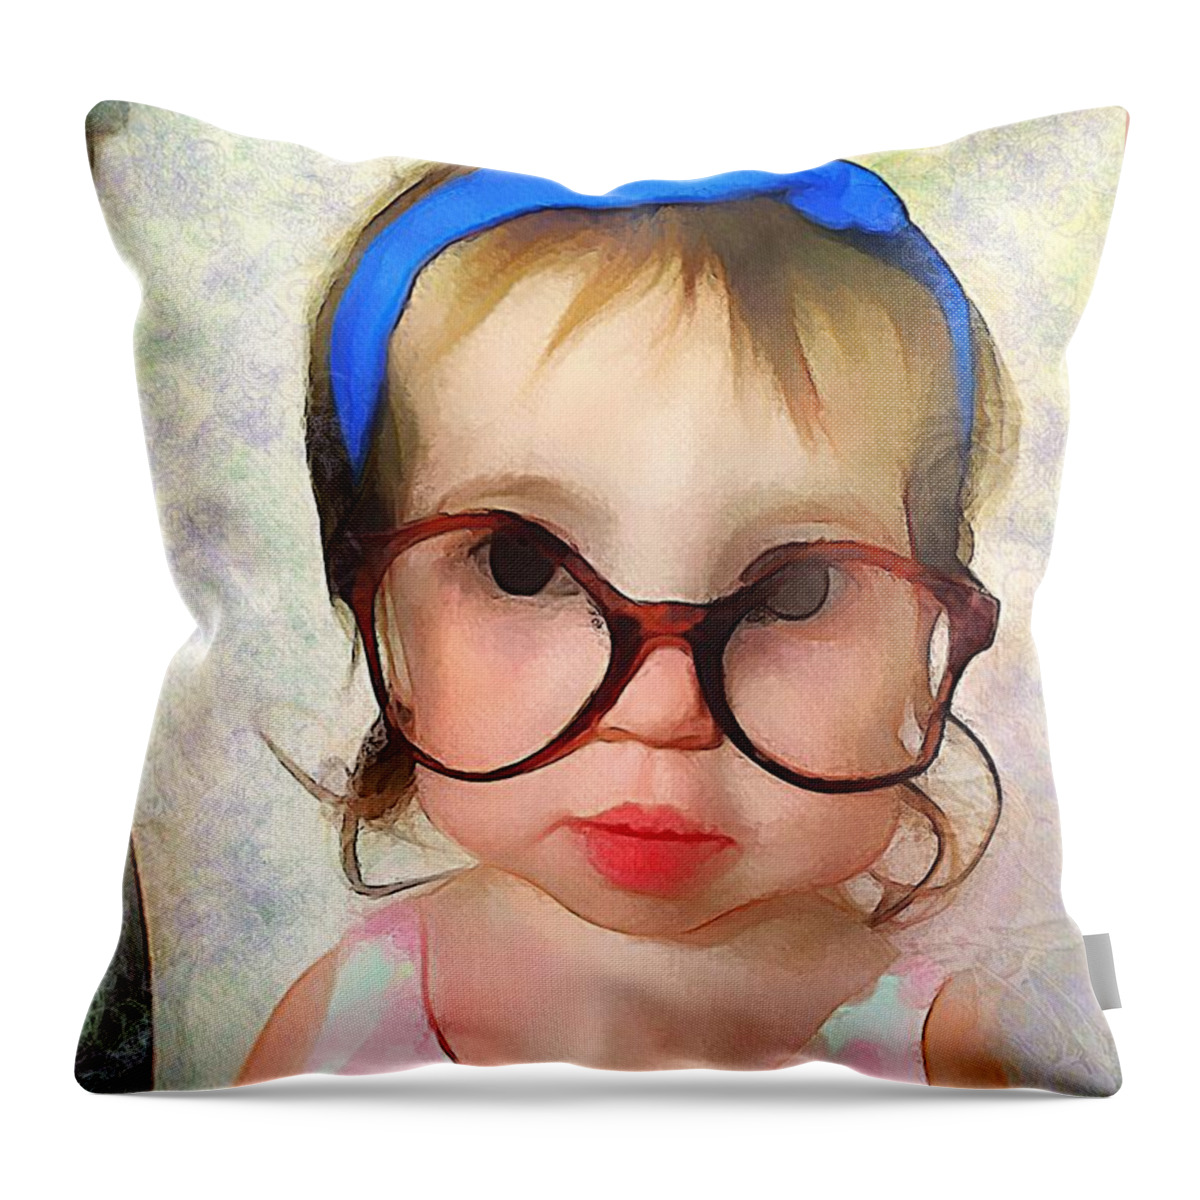 Girl Throw Pillow featuring the digital art I See You by Looking Glass Images